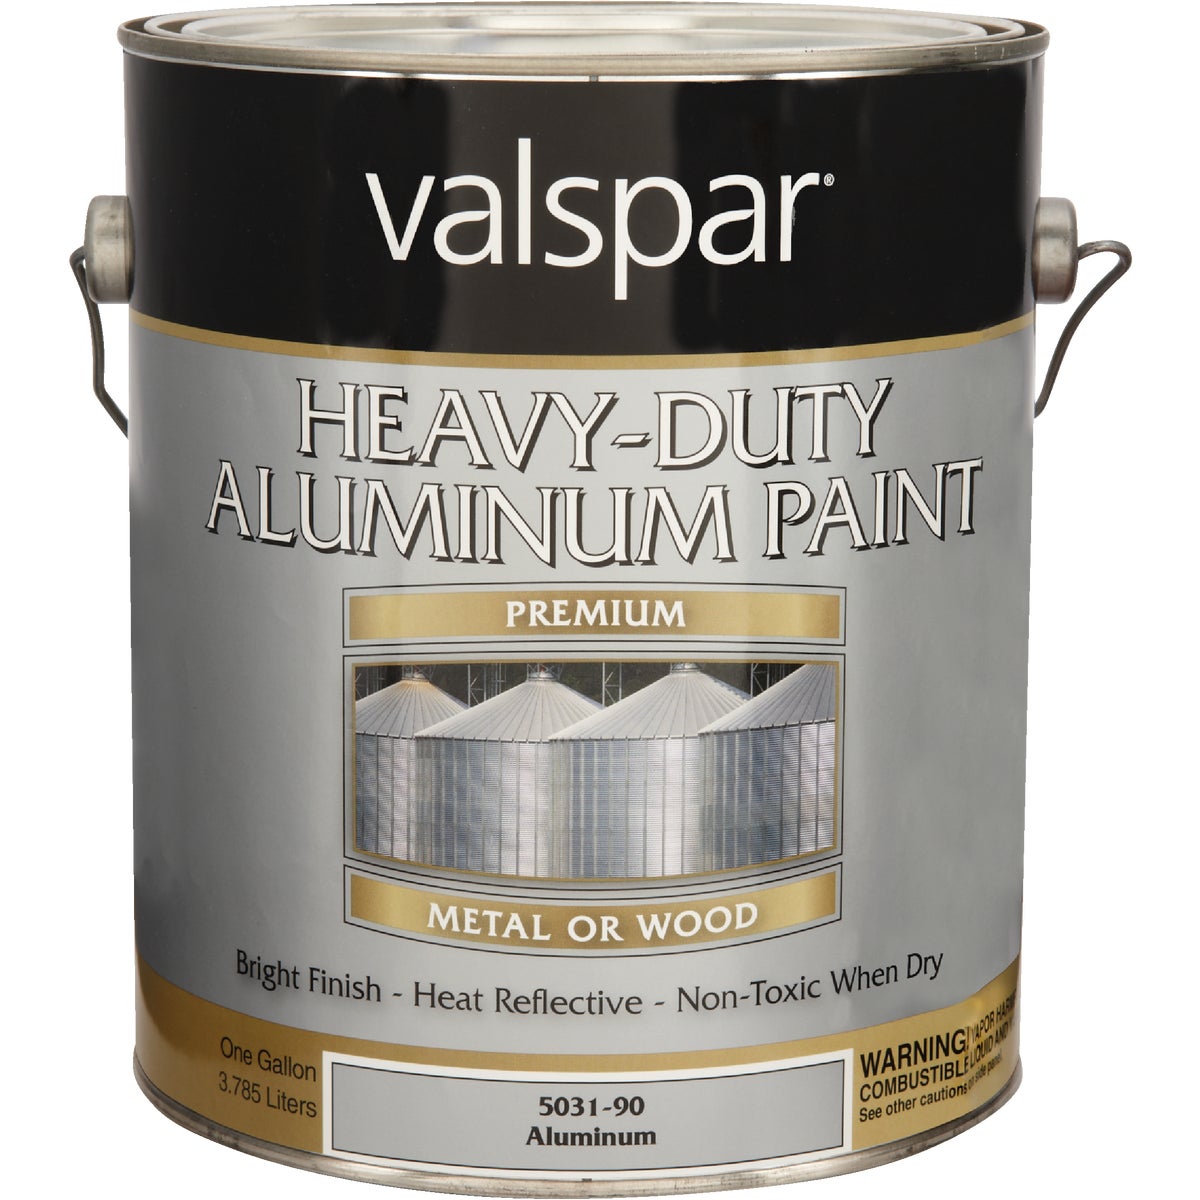 Specialty Paints & Coatings